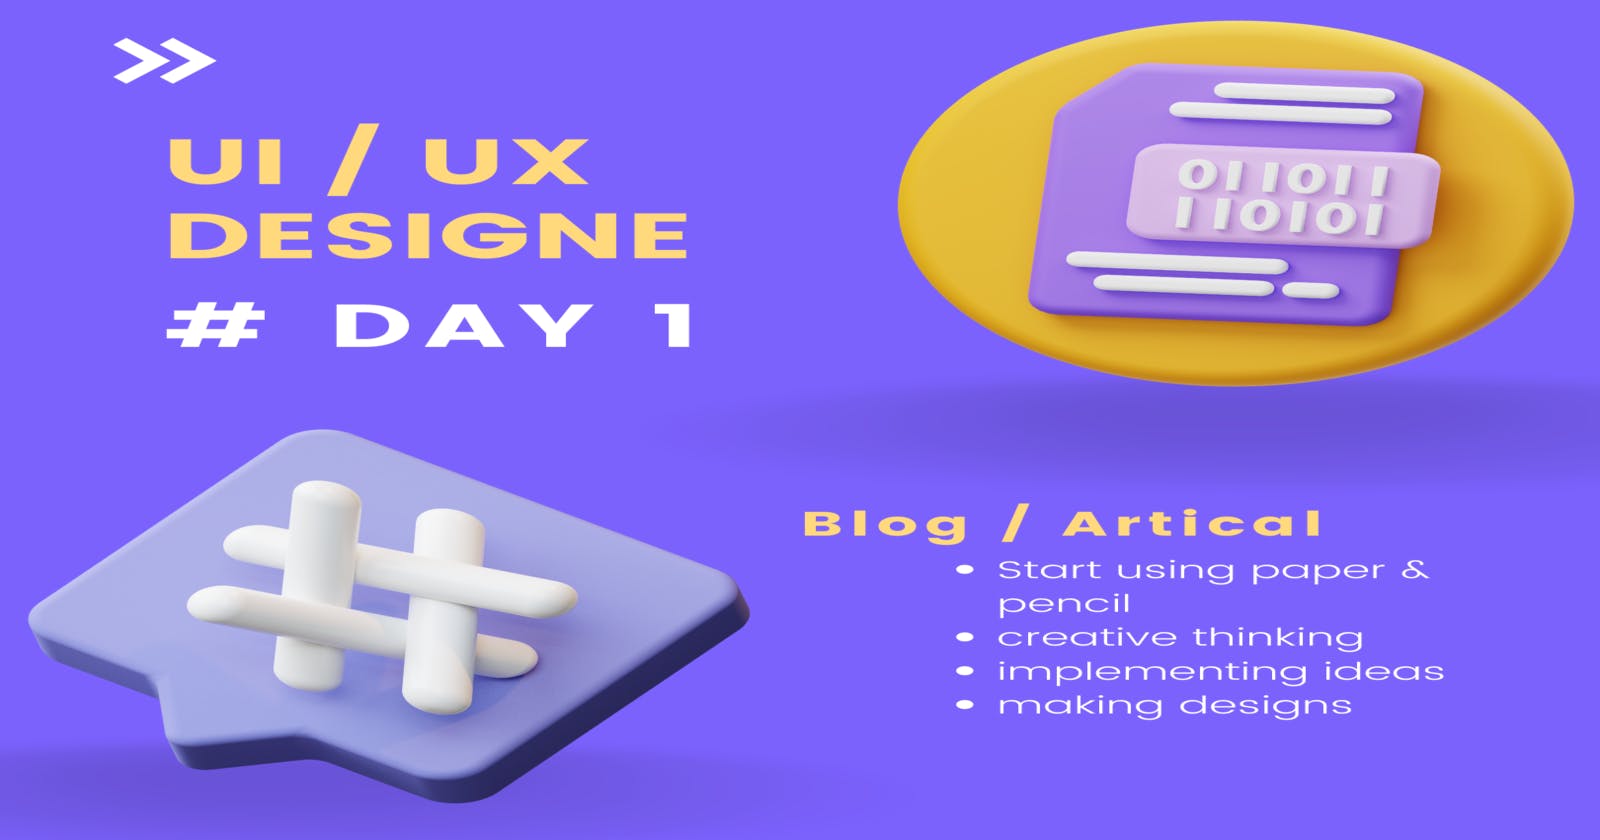 #1st Day of UI/UX